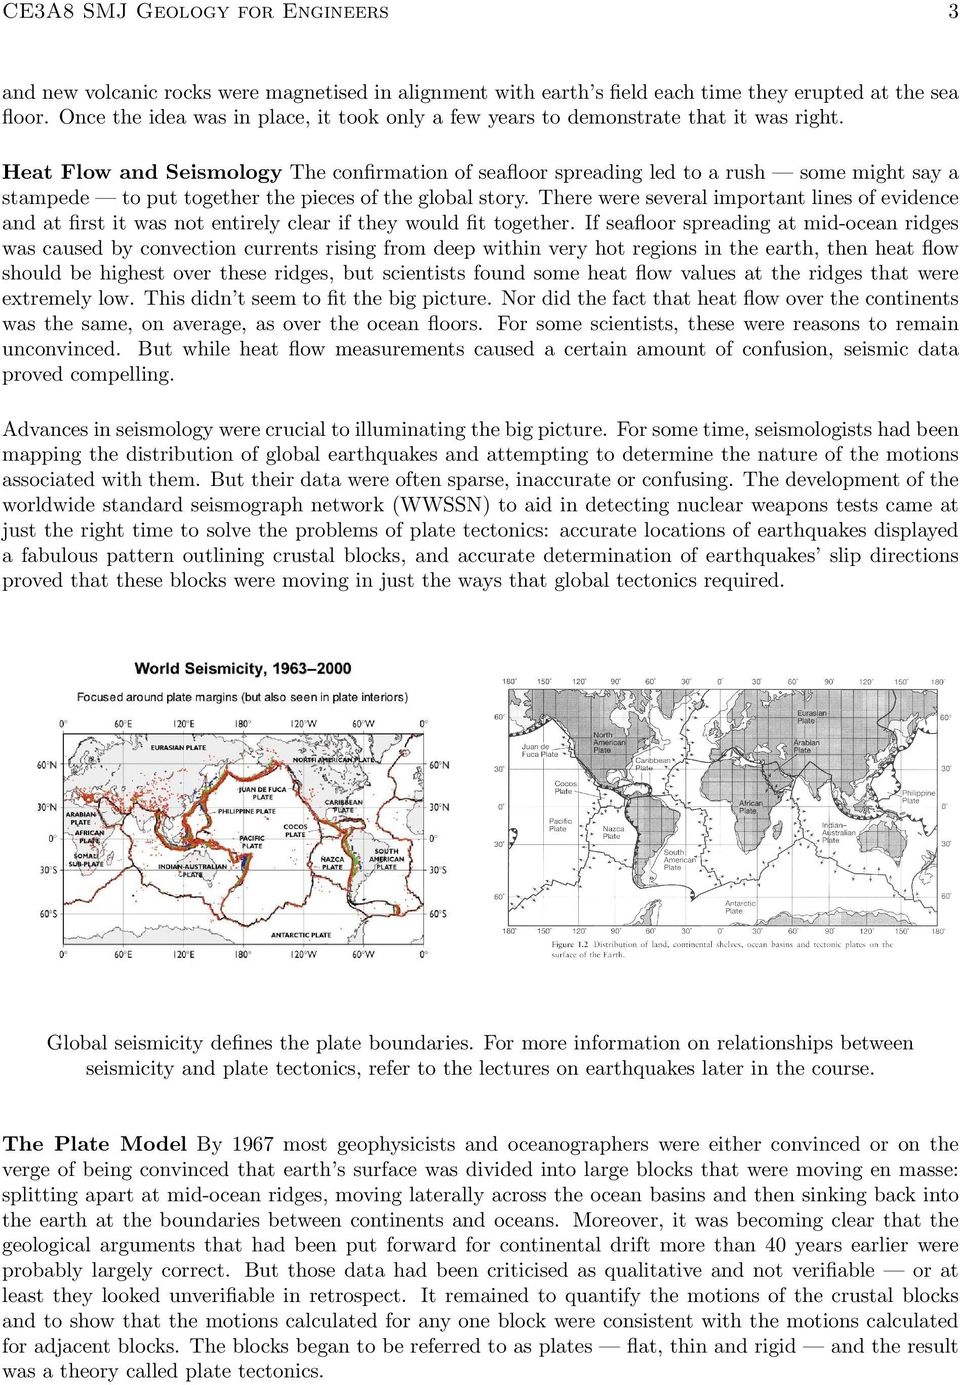 Heat Flow and Seismology The confirmation of seafloor spreading led to a rush some might say a stampede to put together the pieces of the global story.